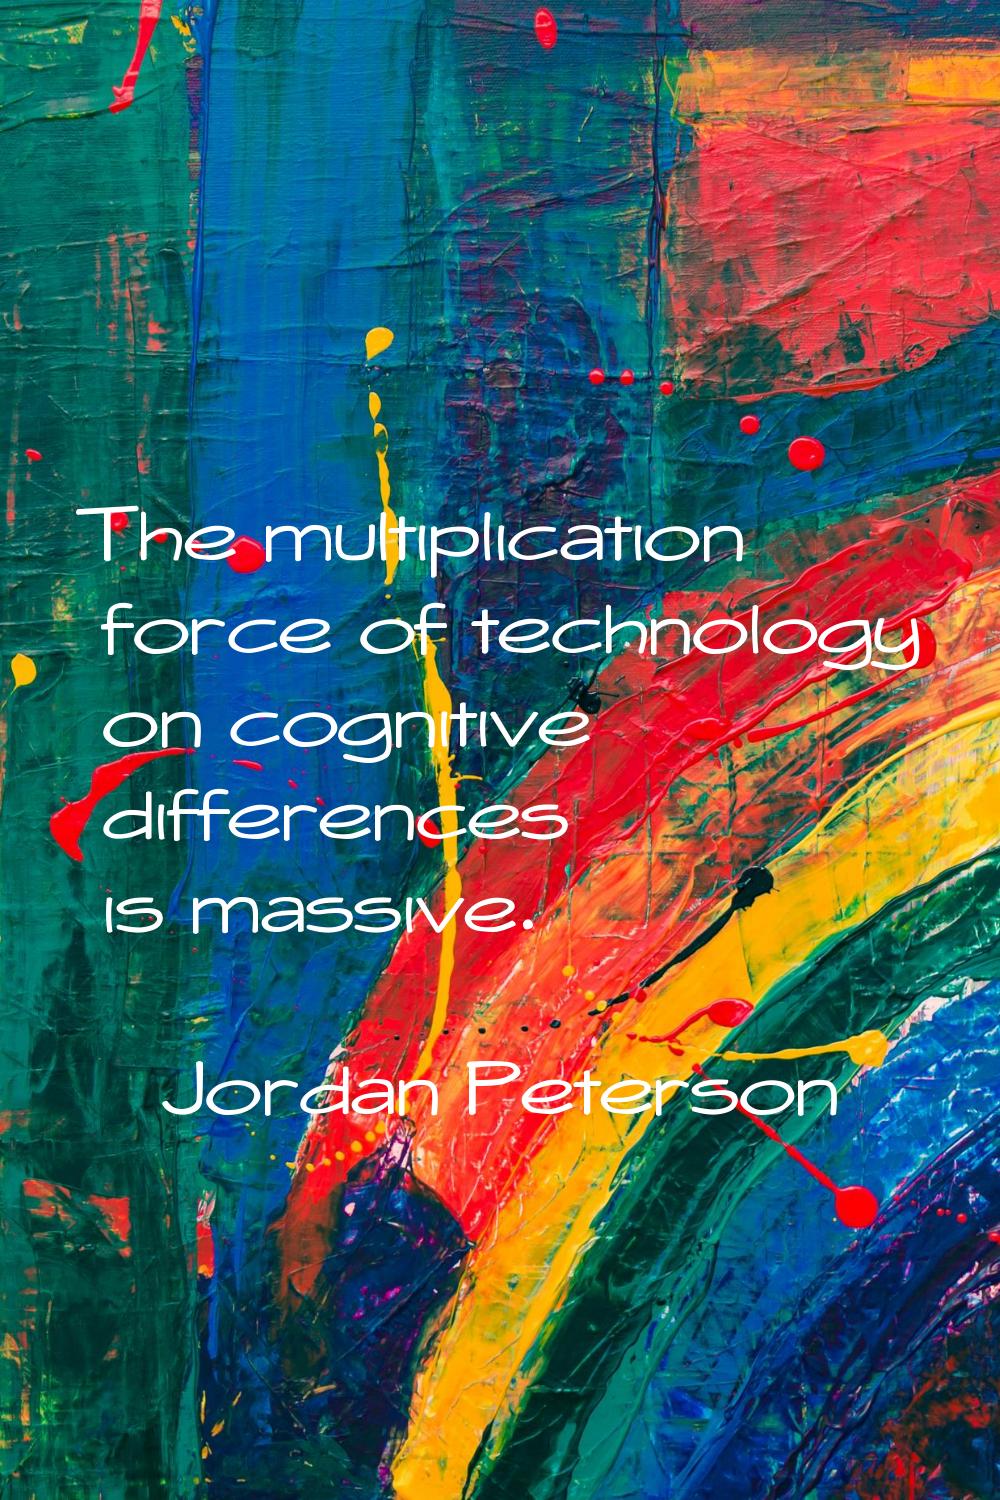 The multiplication force of technology on cognitive differences is massive.